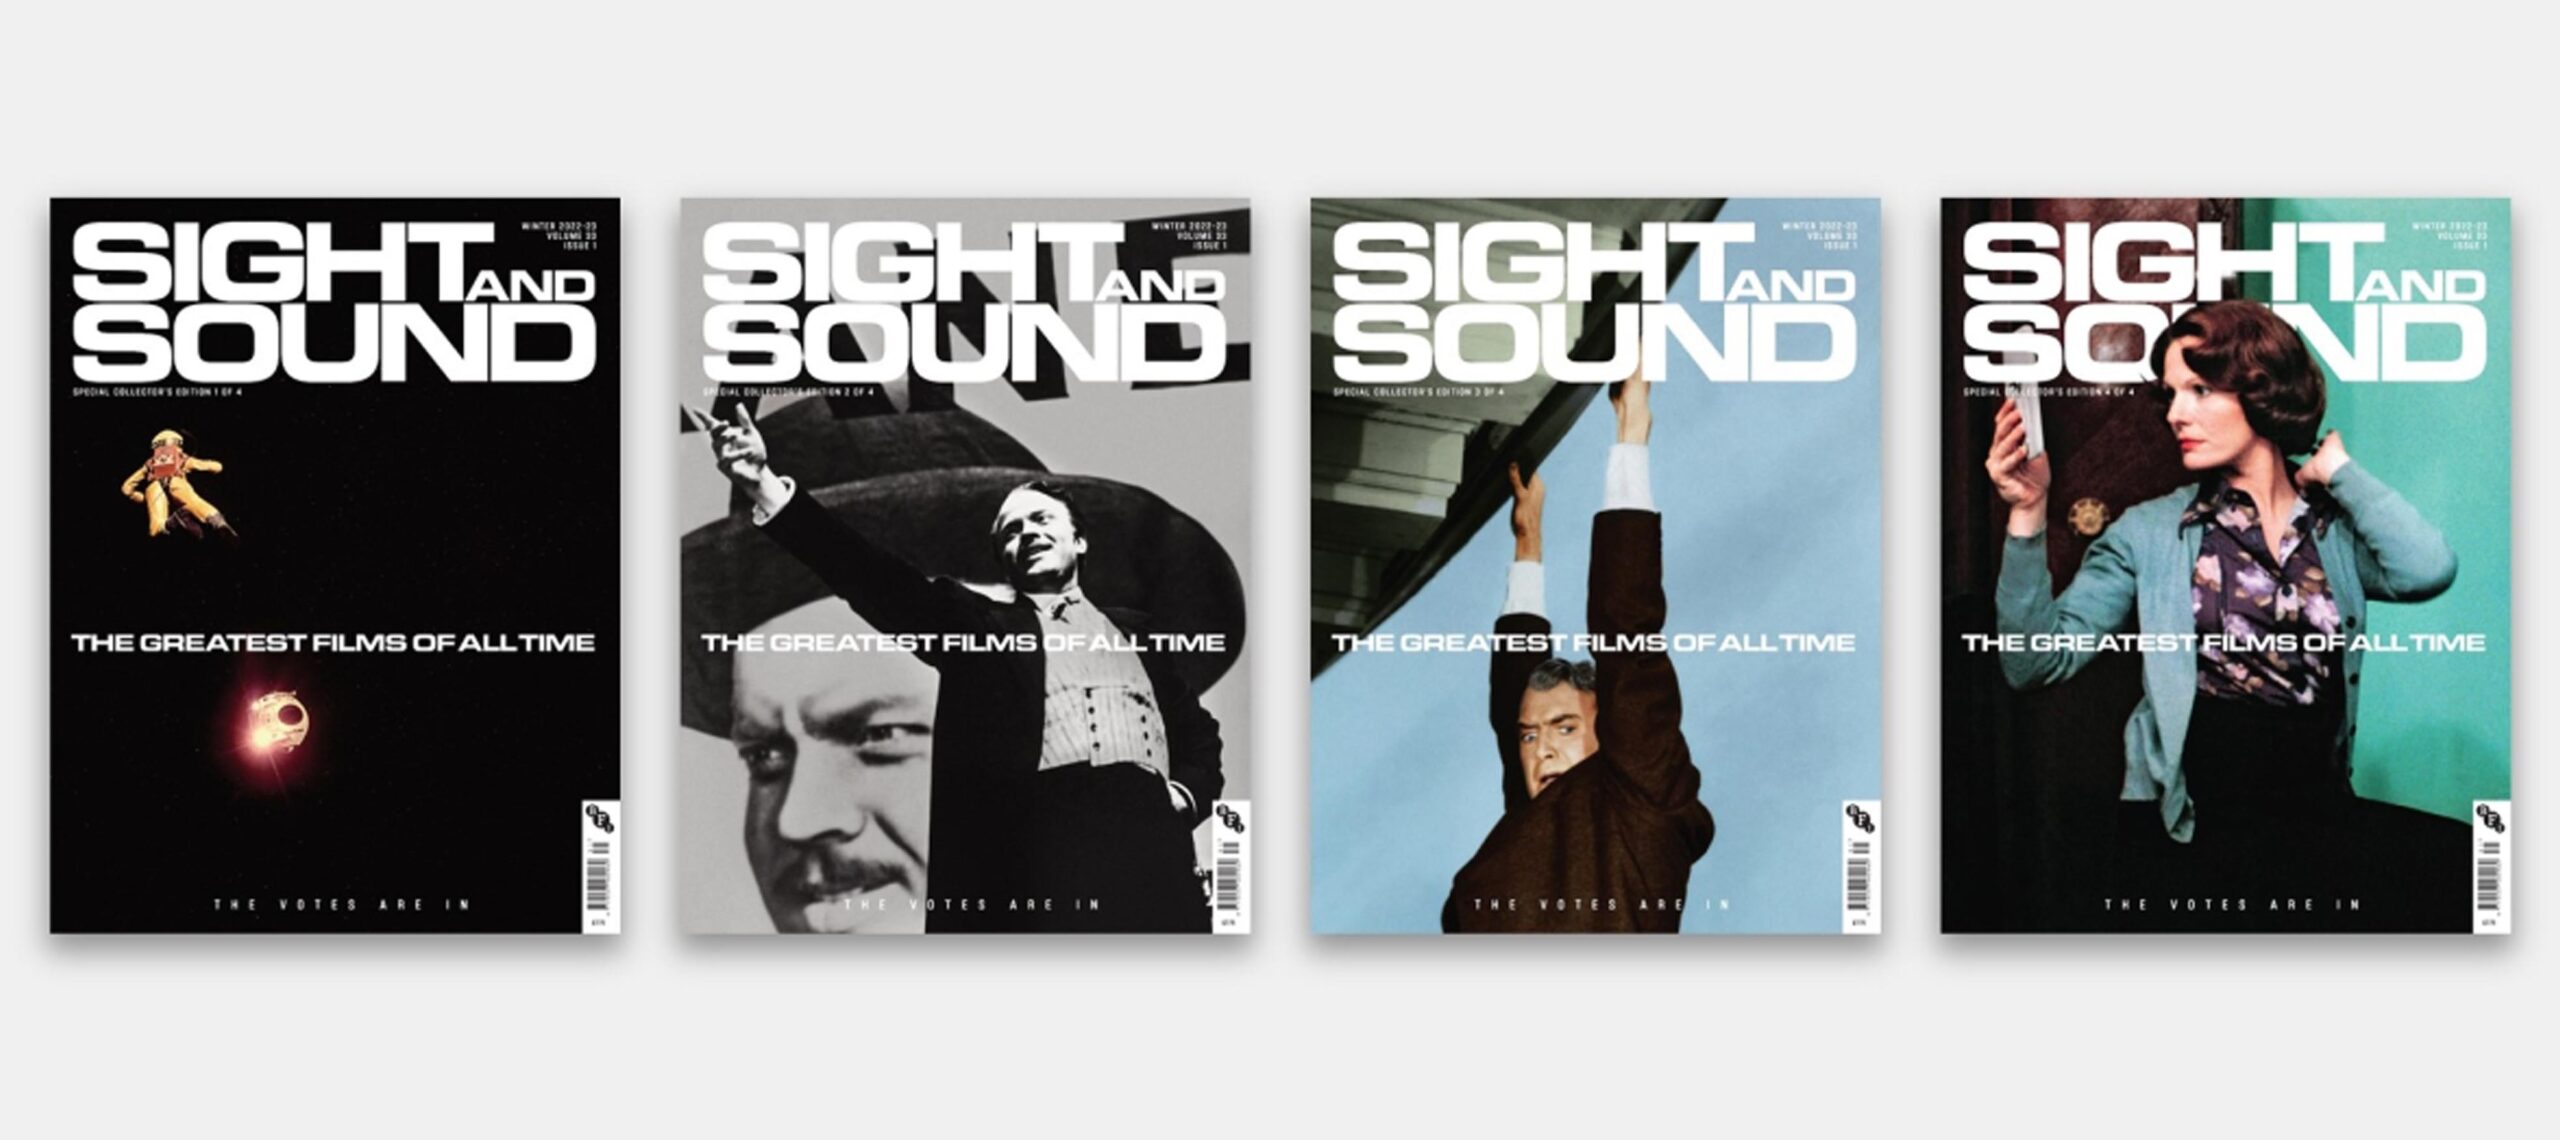 Some of the covers of Sight and Sounds for The Greatest Films of All Time (from left to right): 2001: A Space Odyssey by Stanley Kubrick, Citizen Kane by Orson Wells, Vertigo by Alfred Hitchcock, Jeanne Dielman, 23 quai du Commerce, 1080 Bruxelles by Chantal Akerman. © British Film Institute| BFI Shop